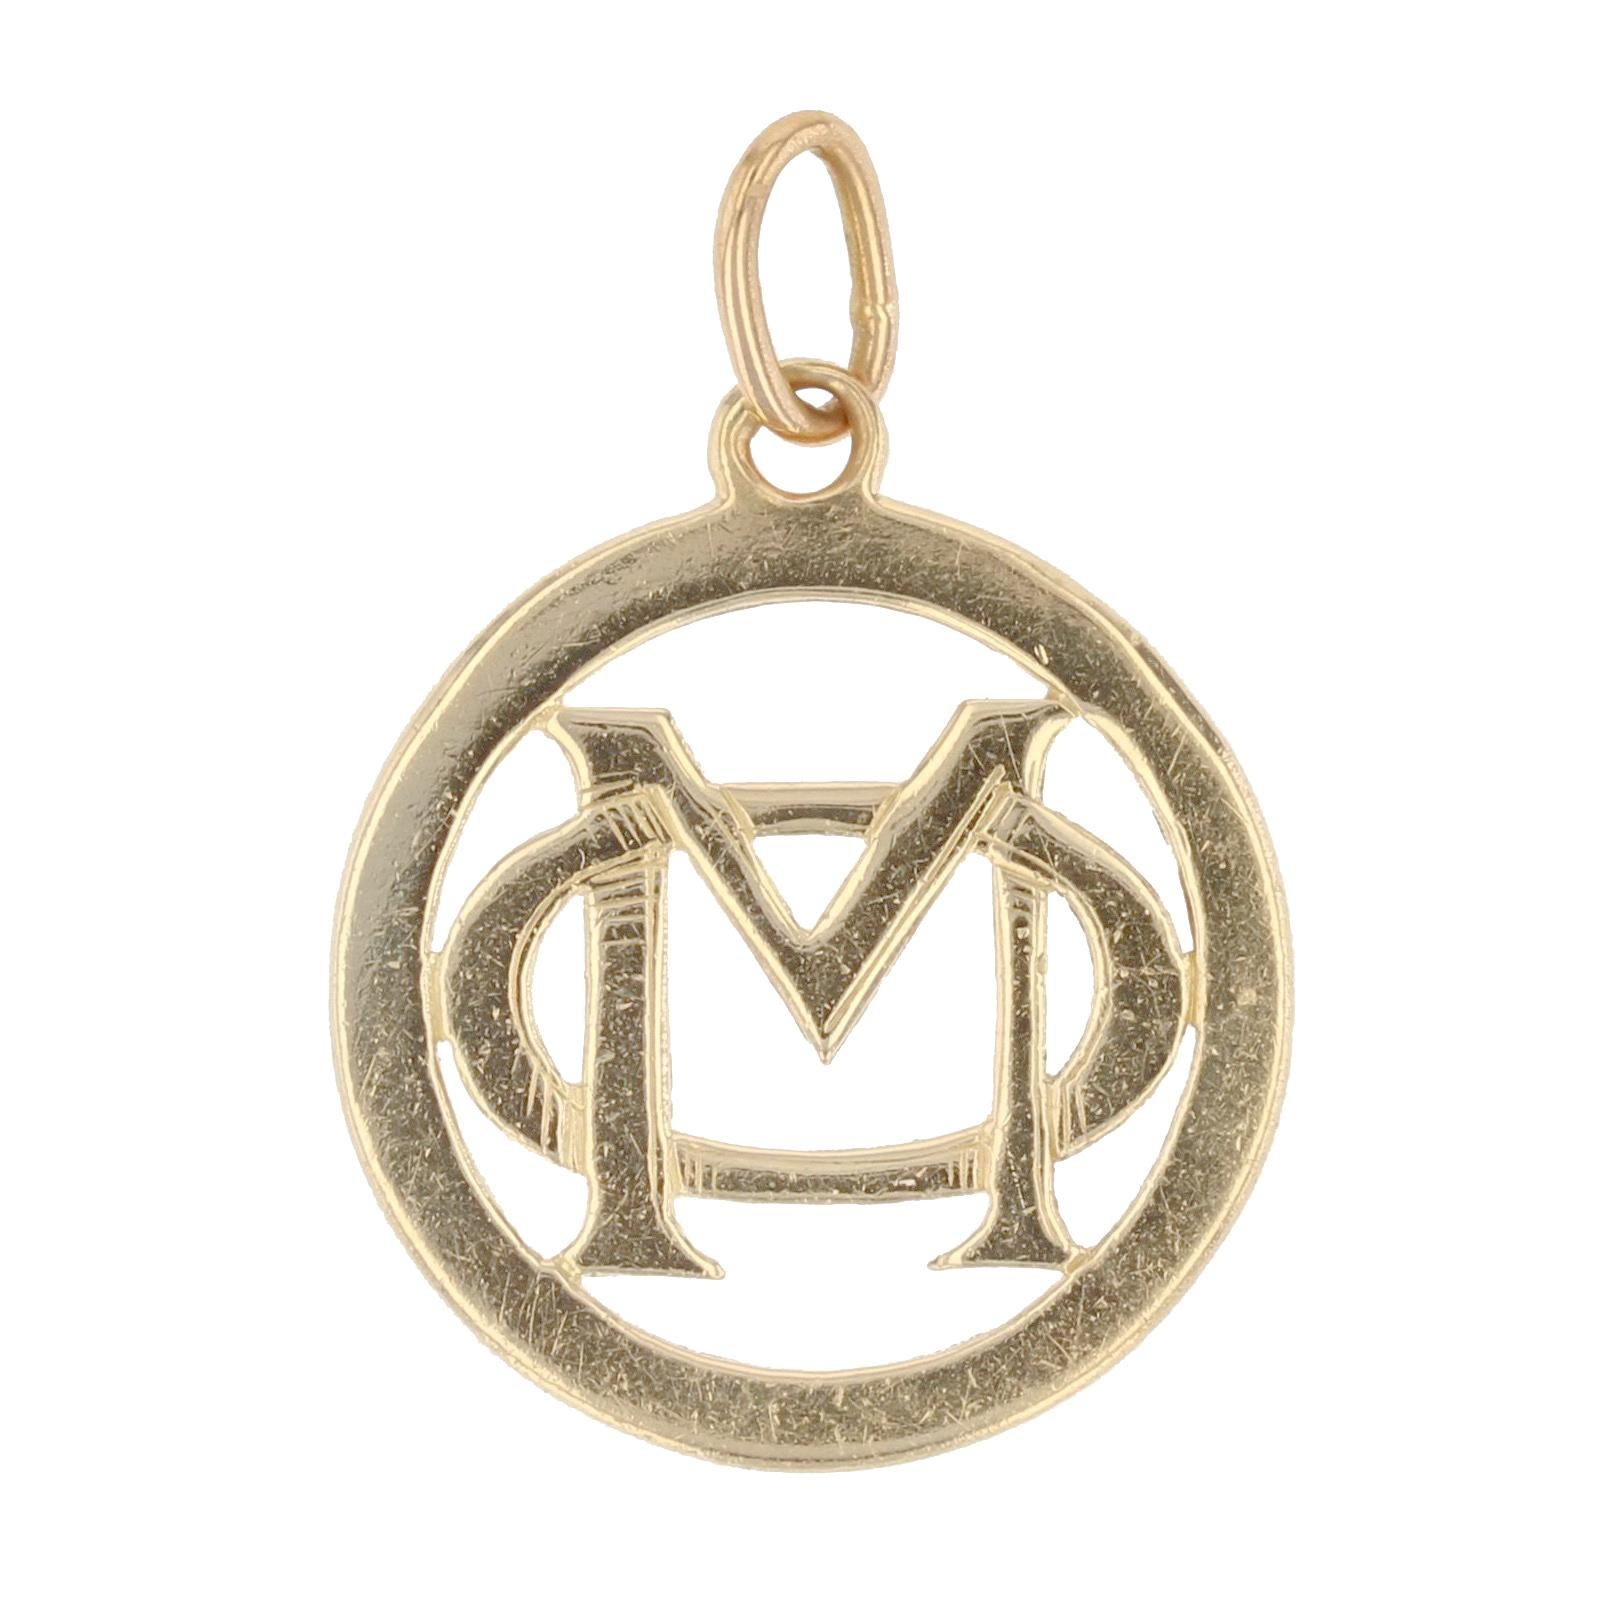 Pendant in 18 karat yellow gold.
This antique pendant of round shape represents the initials 